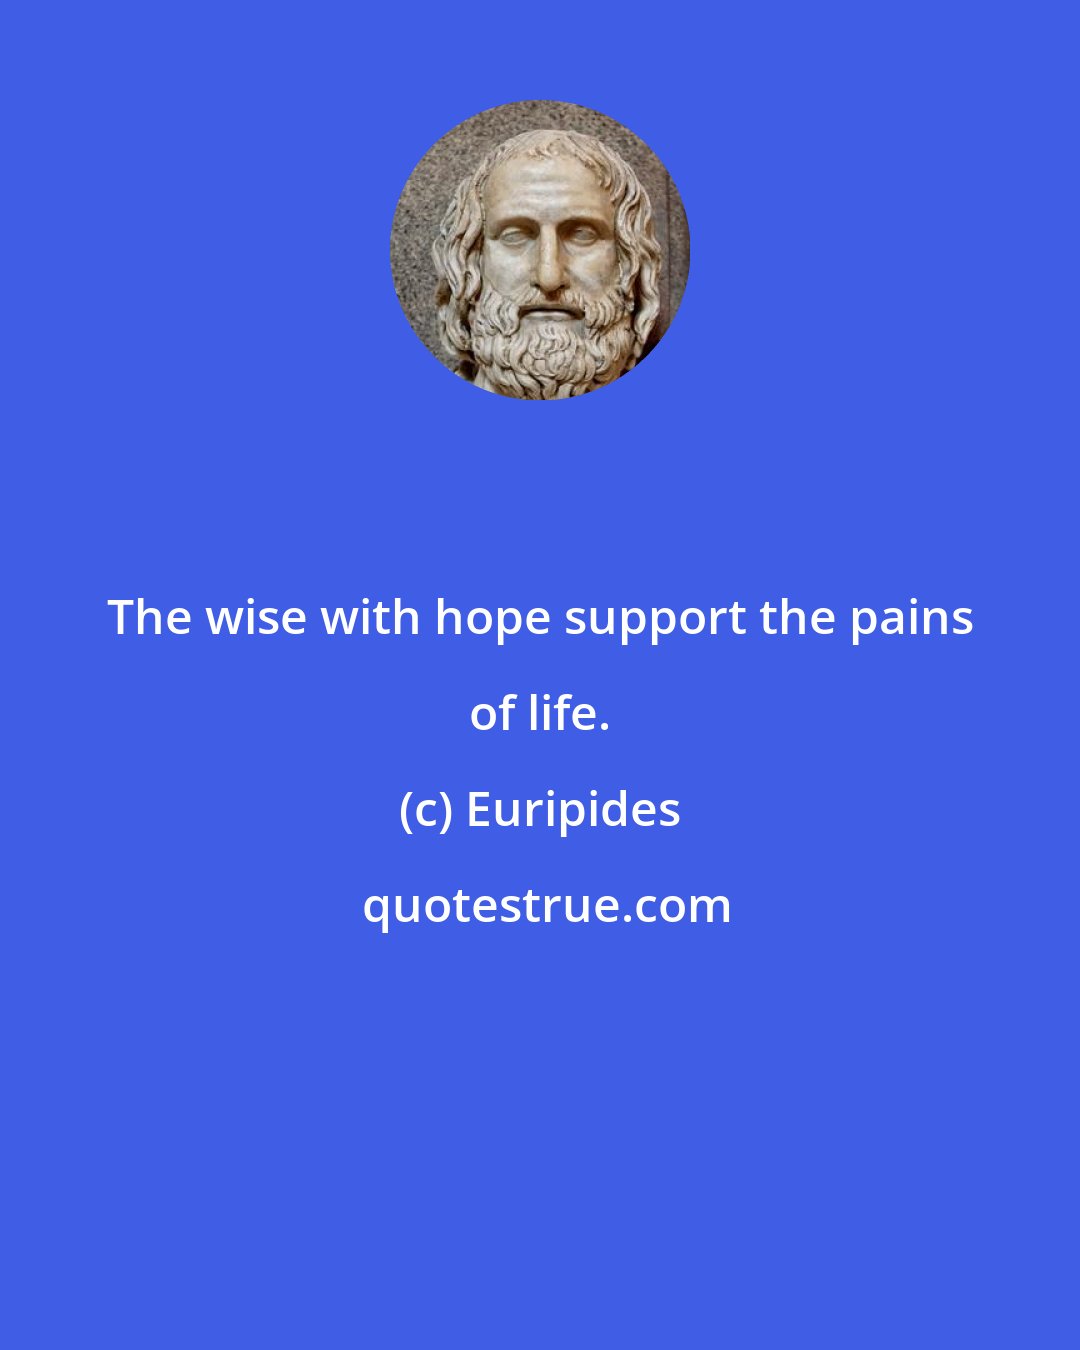 Euripides: The wise with hope support the pains of life.